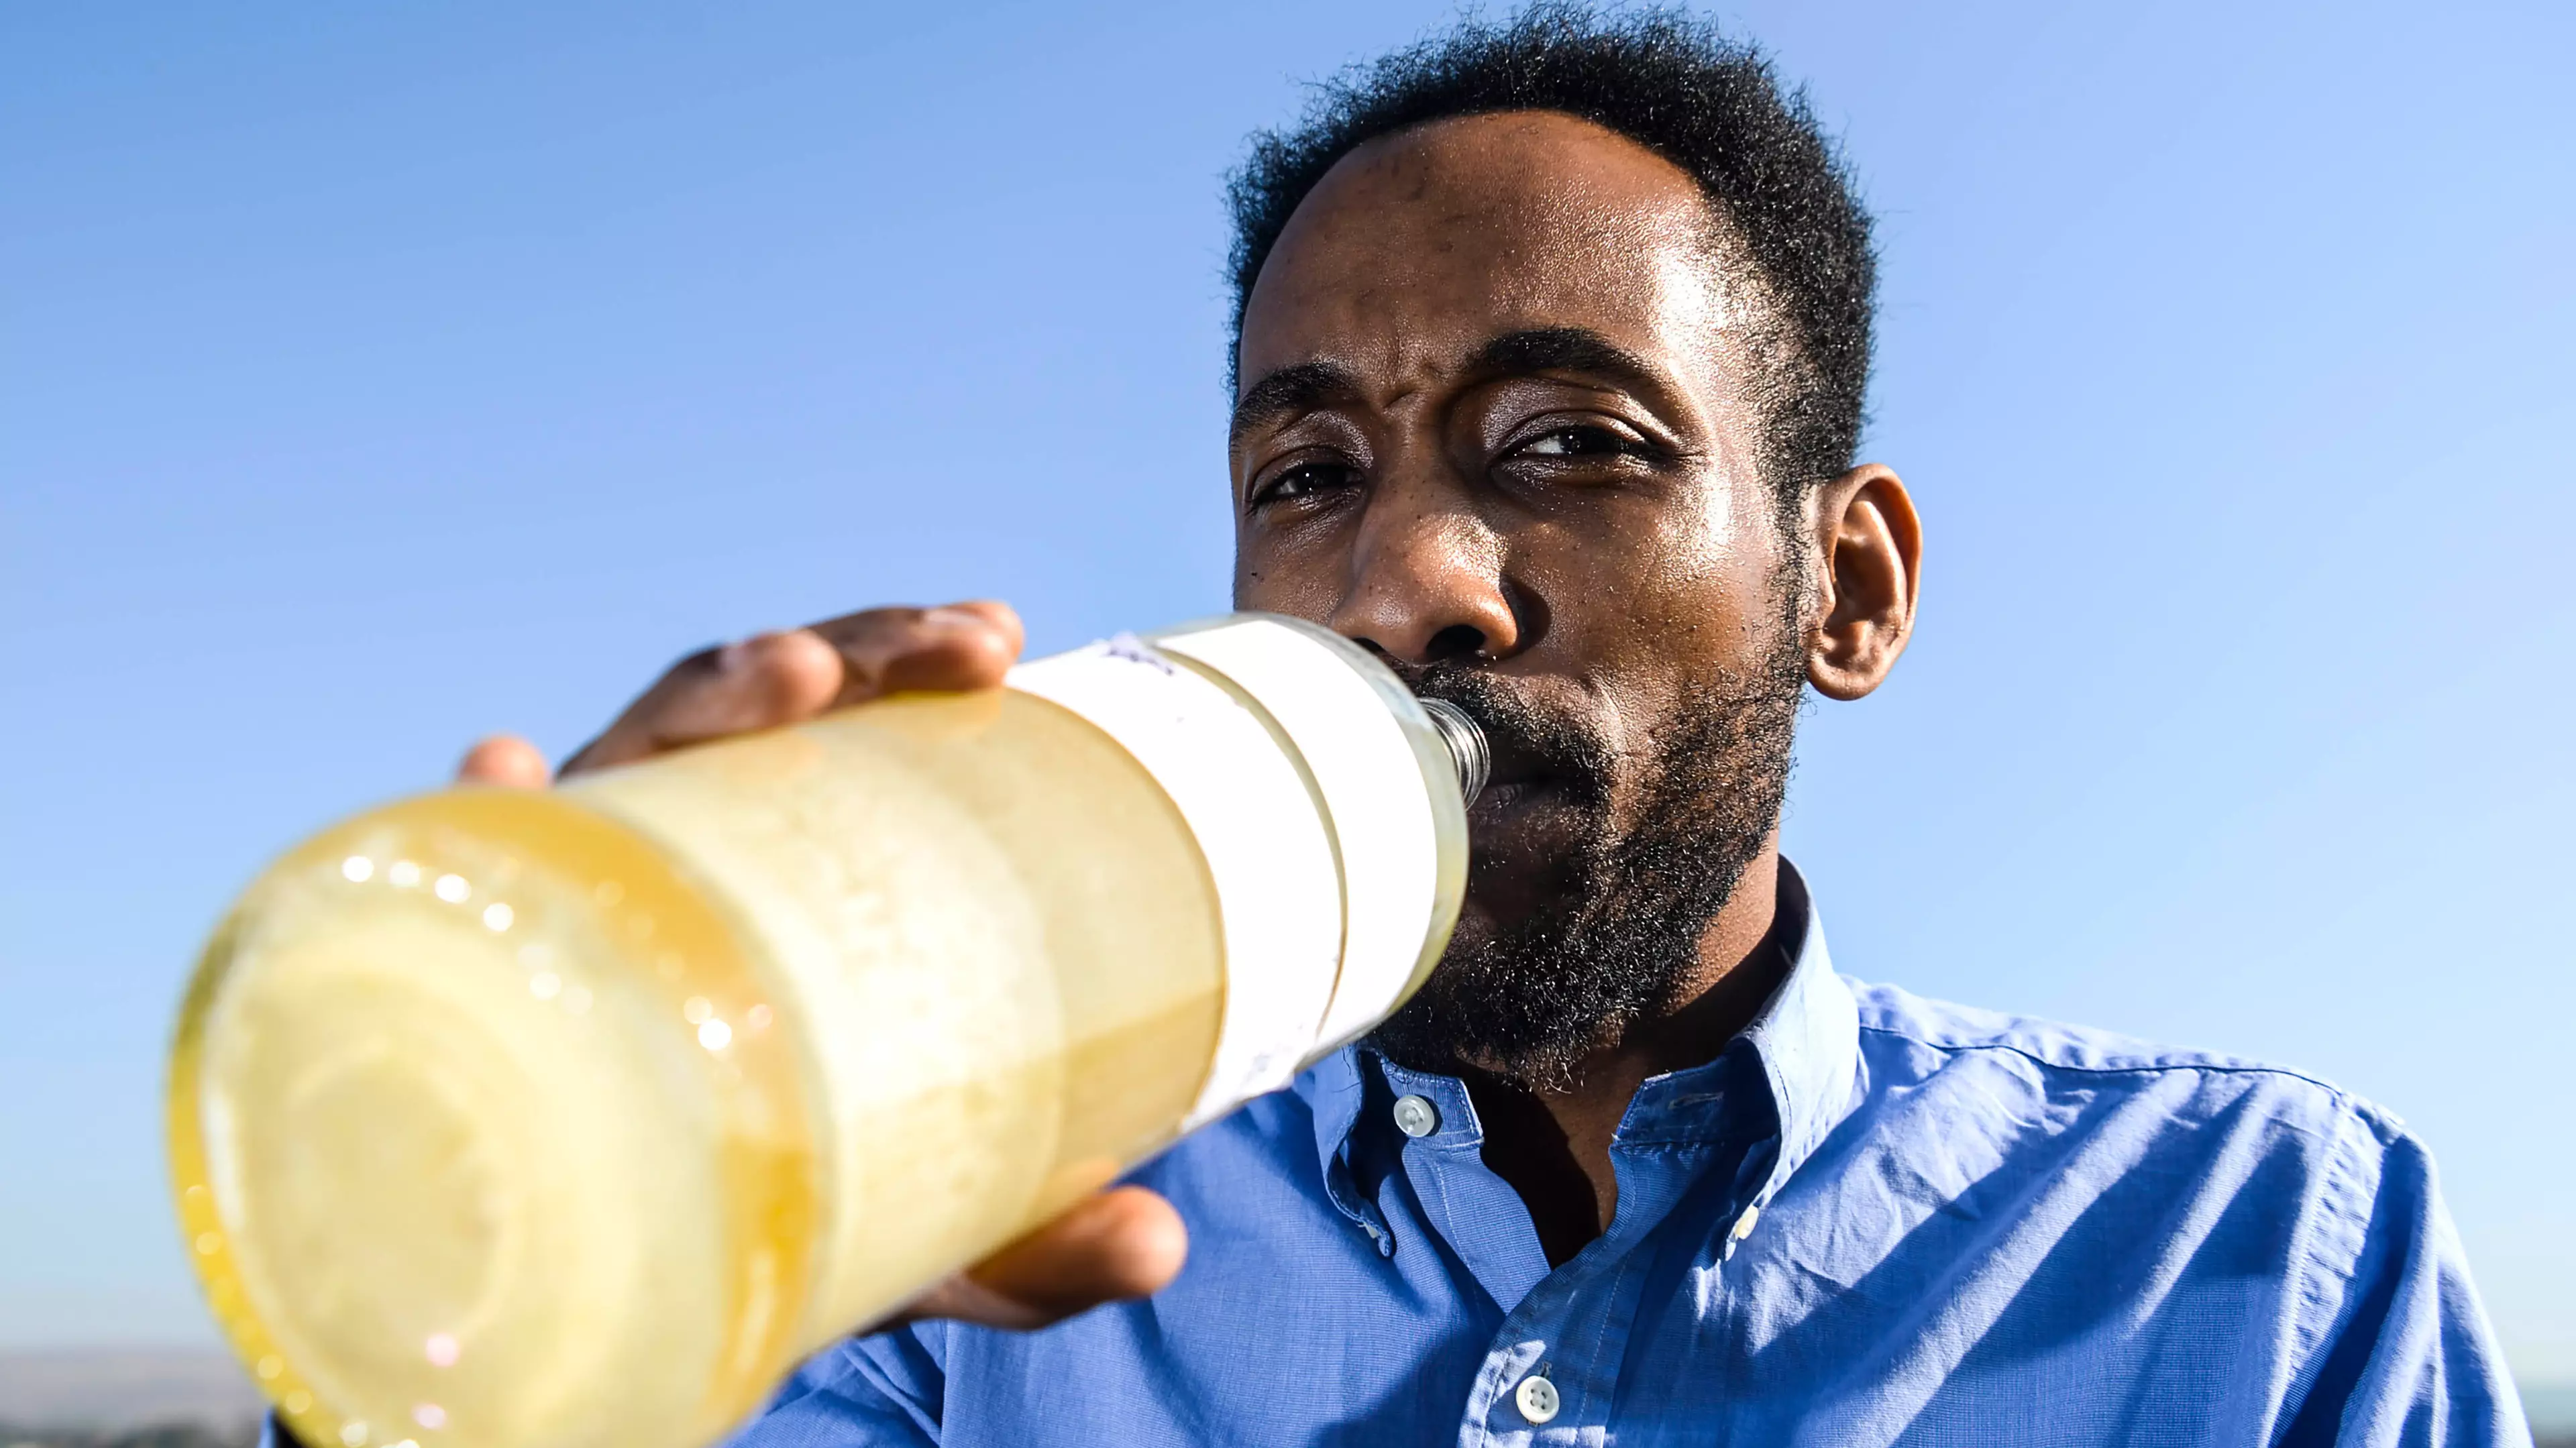 Man Says He's 'Healthier, Happier And Smarter' Thanks To Drinking His Own Pee